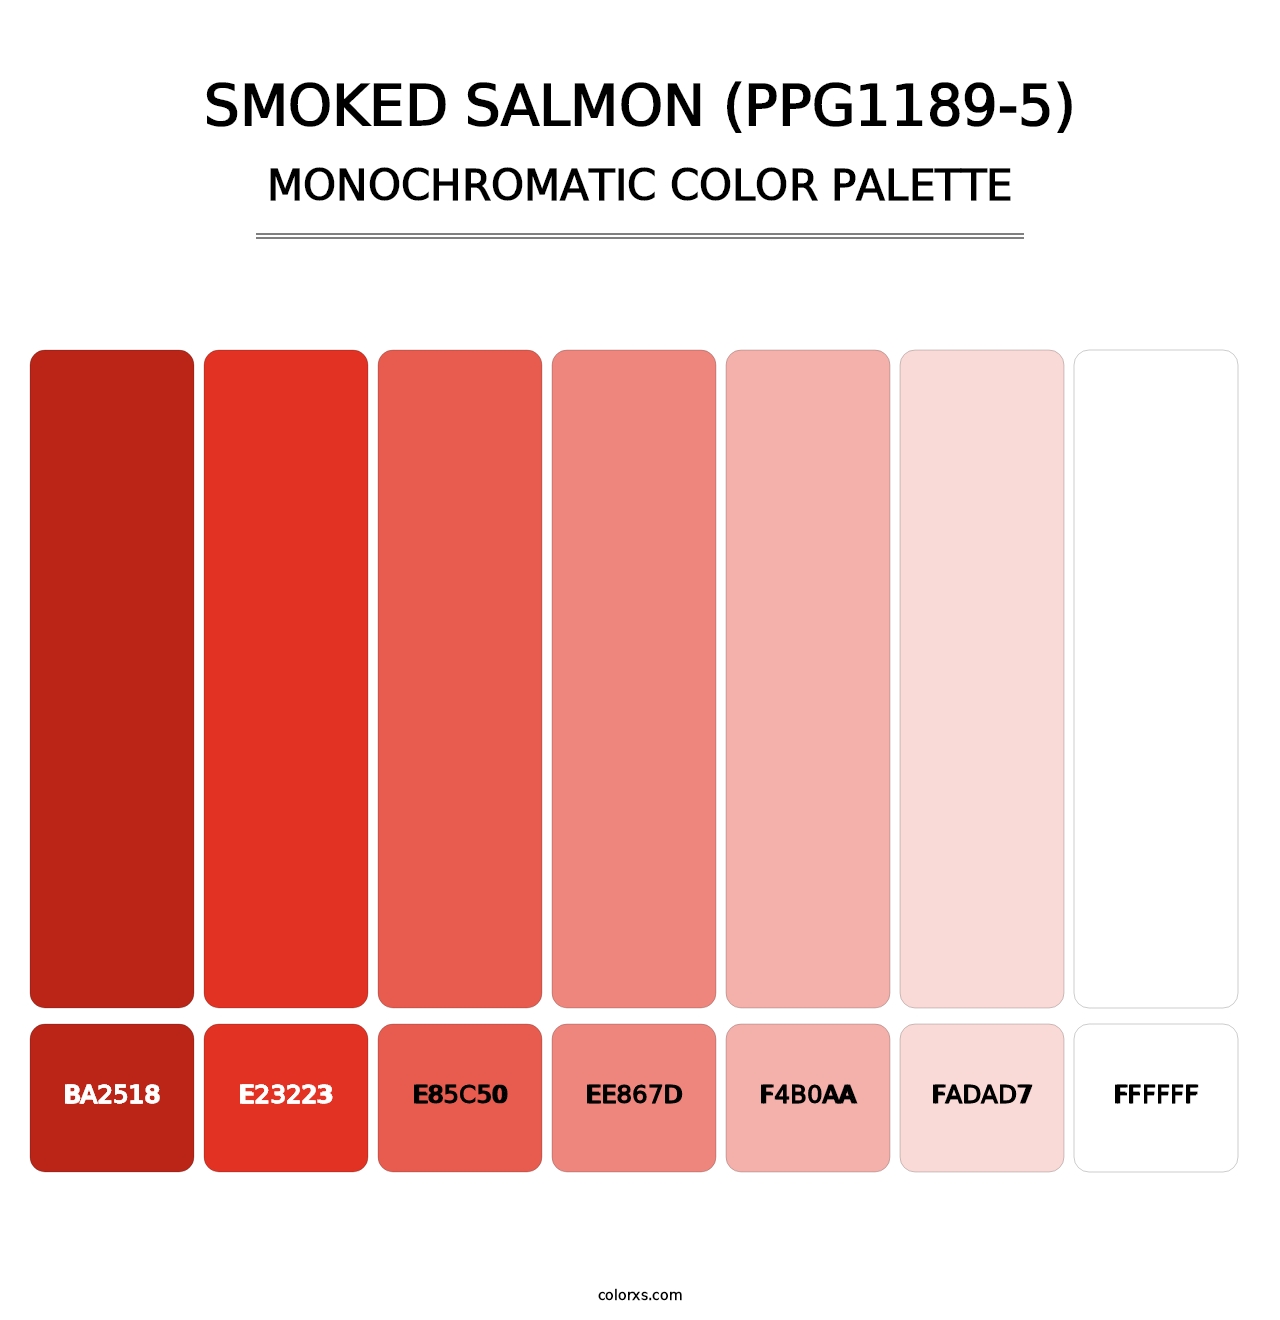 Smoked Salmon (PPG1189-5) - Monochromatic Color Palette